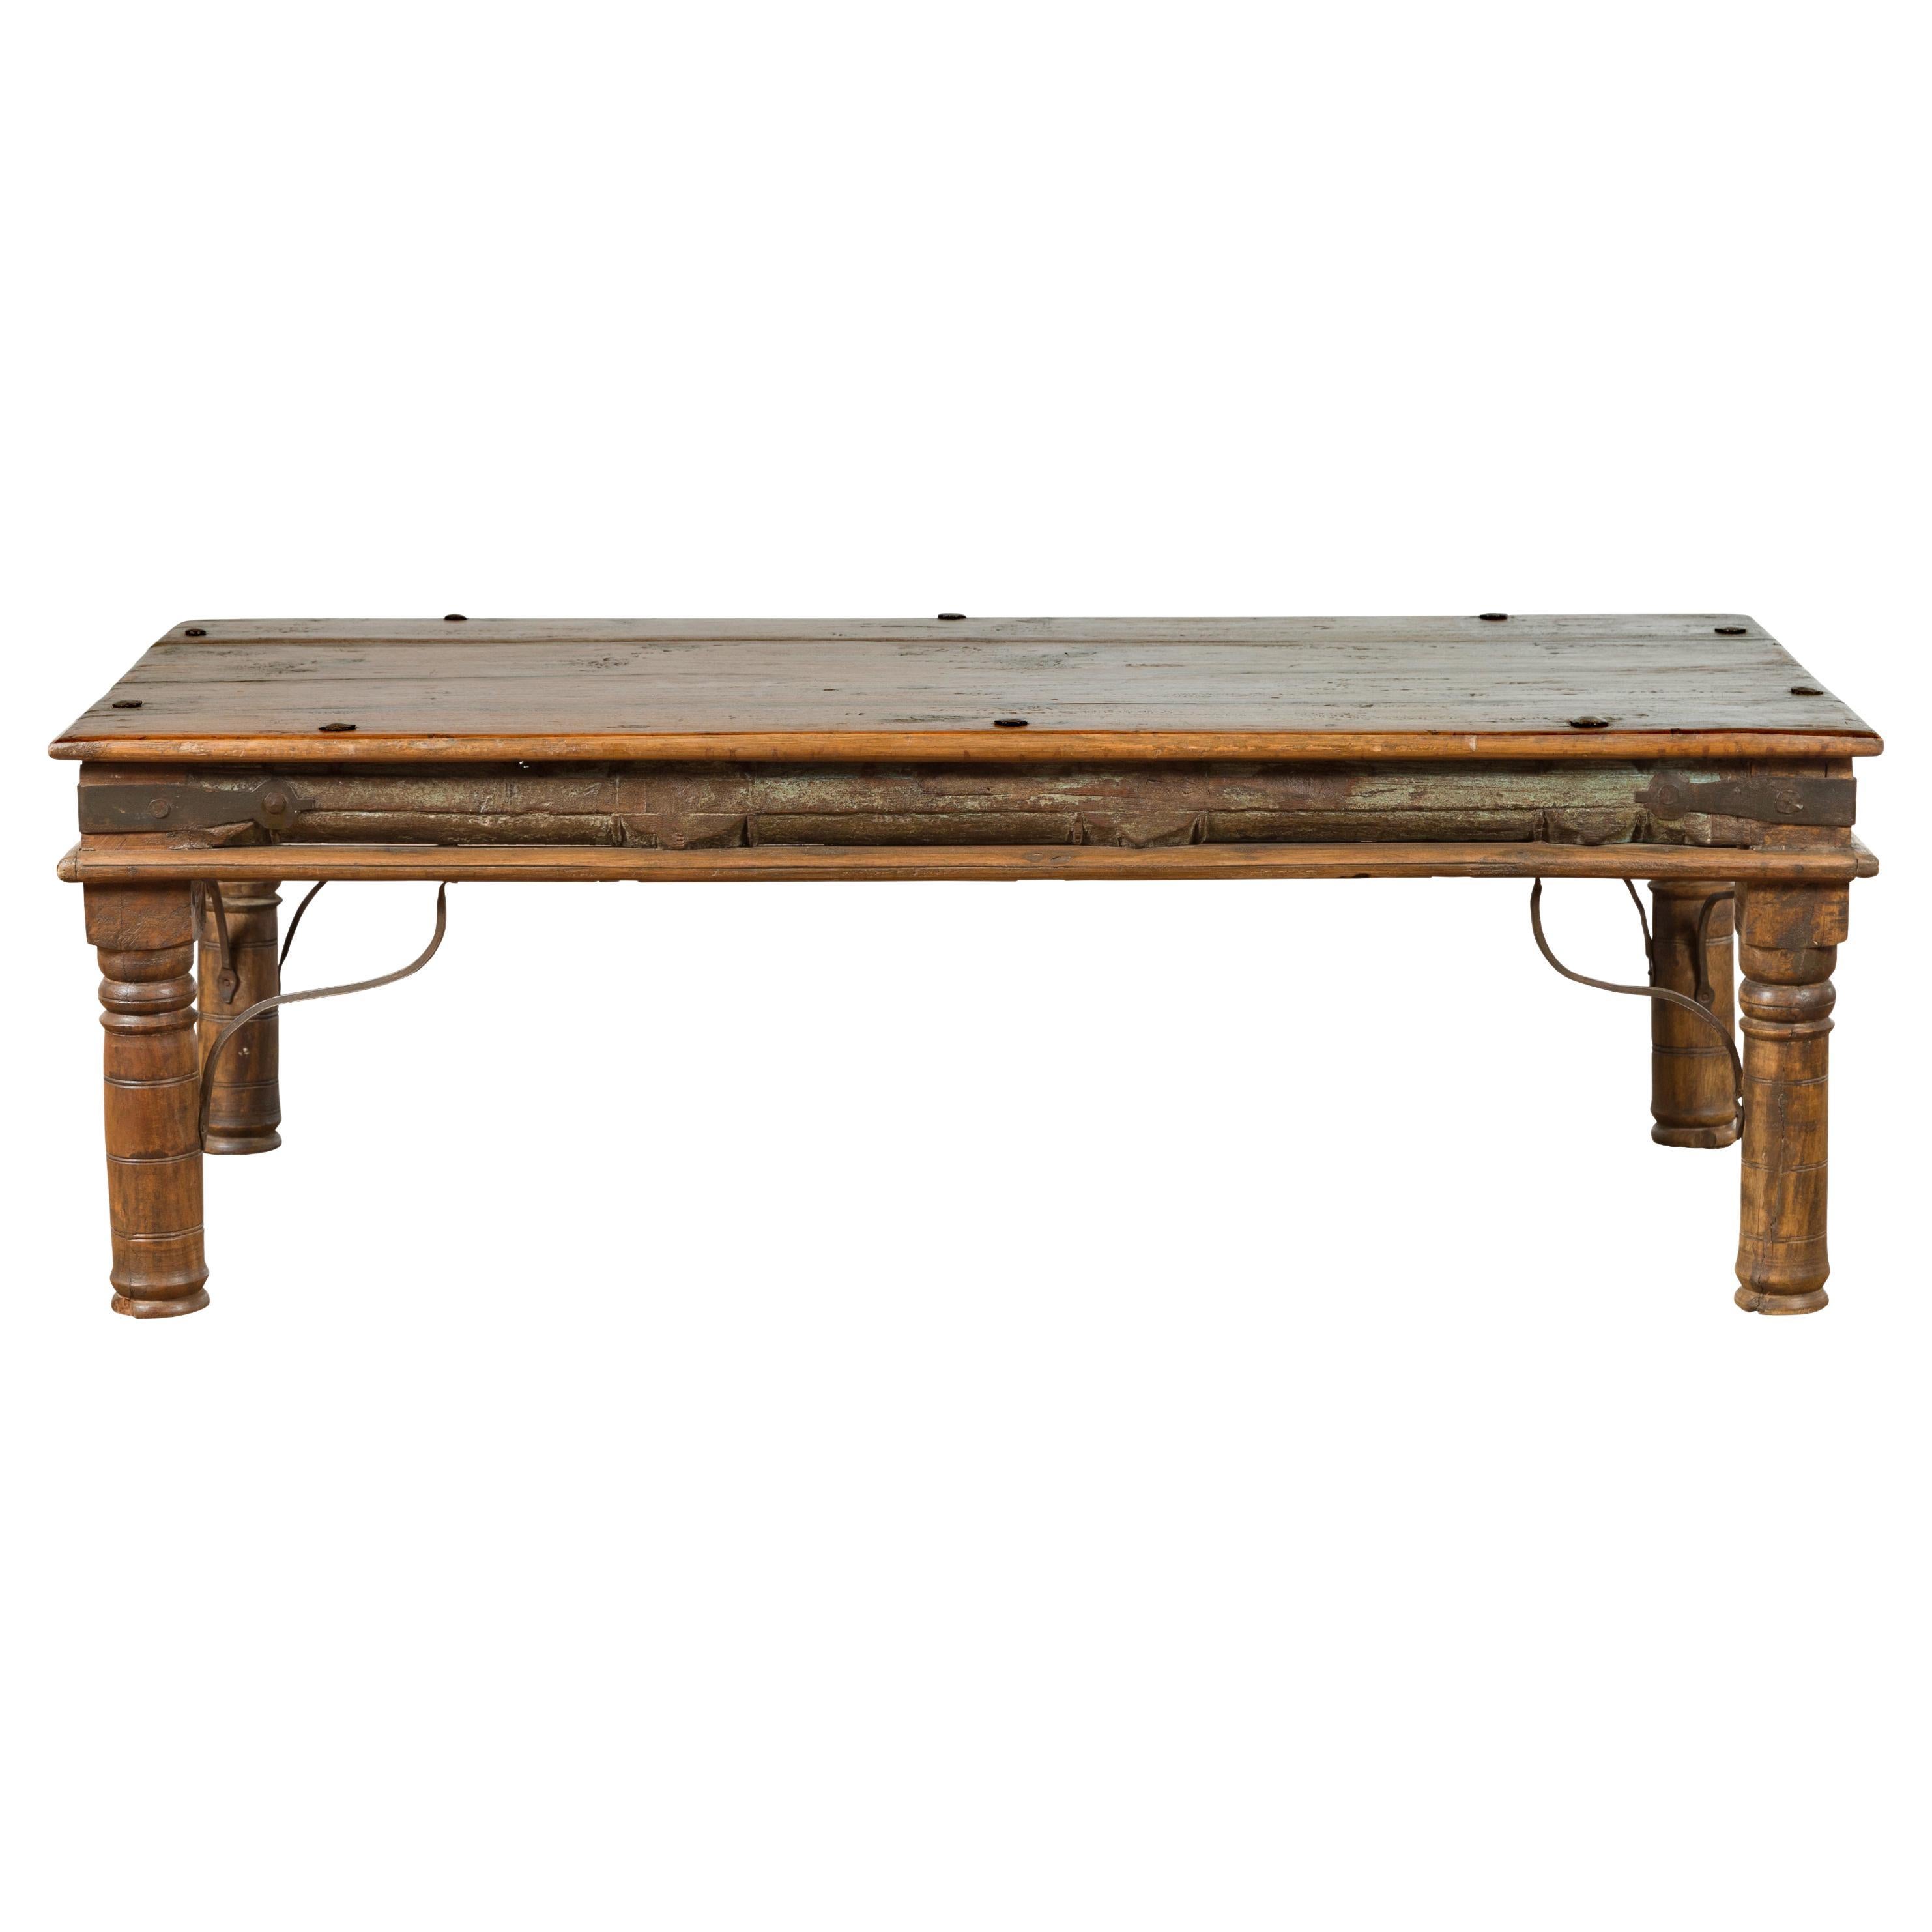 19th Century Rustic Indian Coffee Table with Painted Apron and Iron Accents